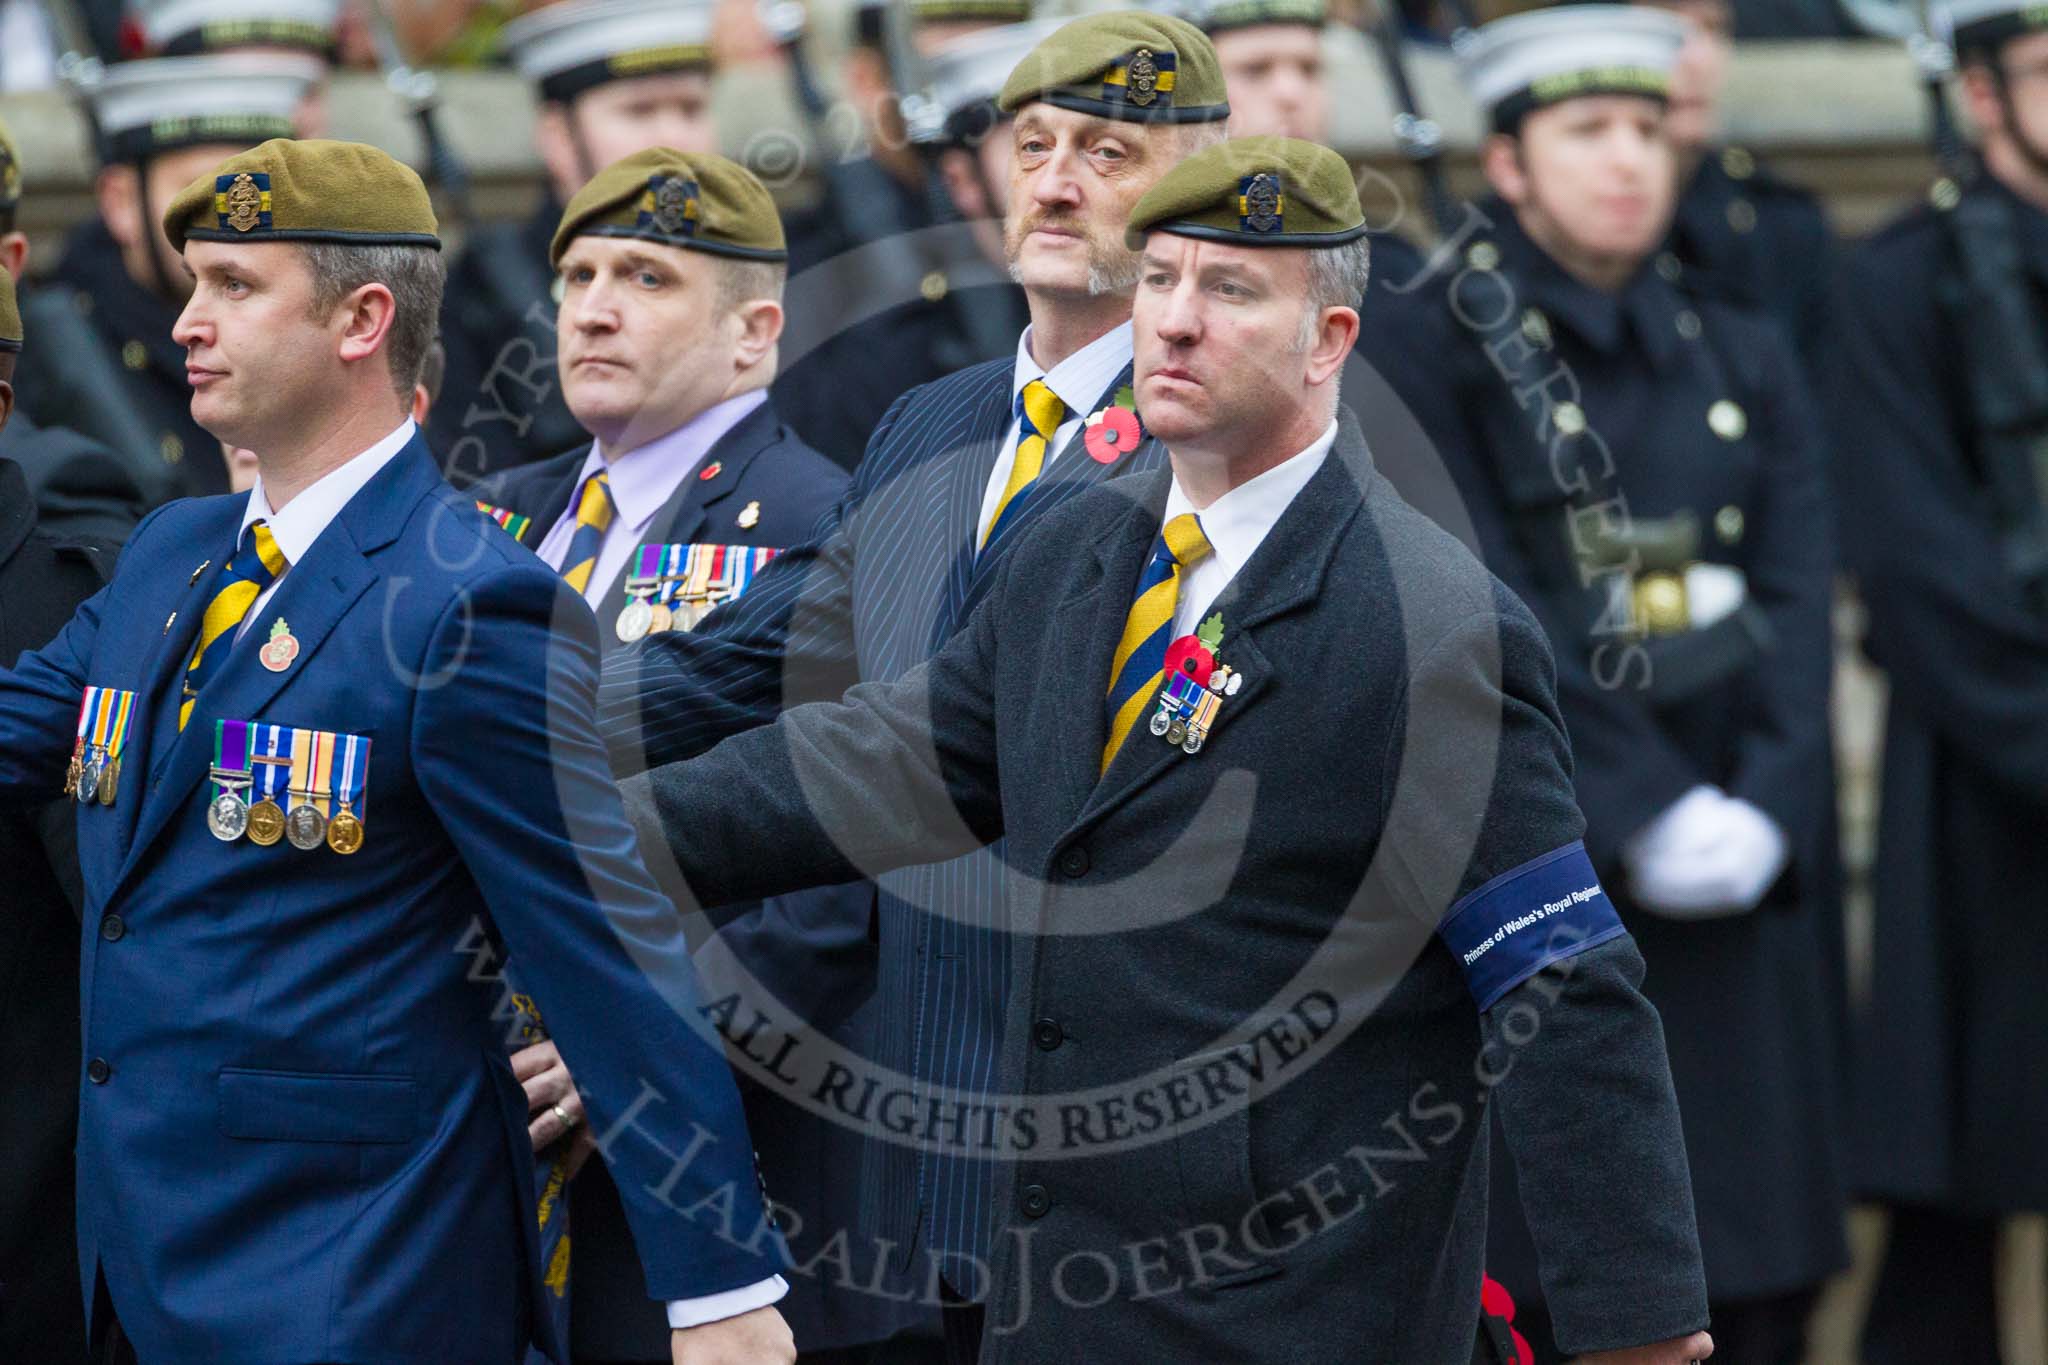 Remembrance Sunday at the Cenotaph 2015: Group A15, Princess of Wales's Royal Regiment.
Cenotaph, Whitehall, London SW1,
London,
Greater London,
United Kingdom,
on 08 November 2015 at 12:11, image #1310